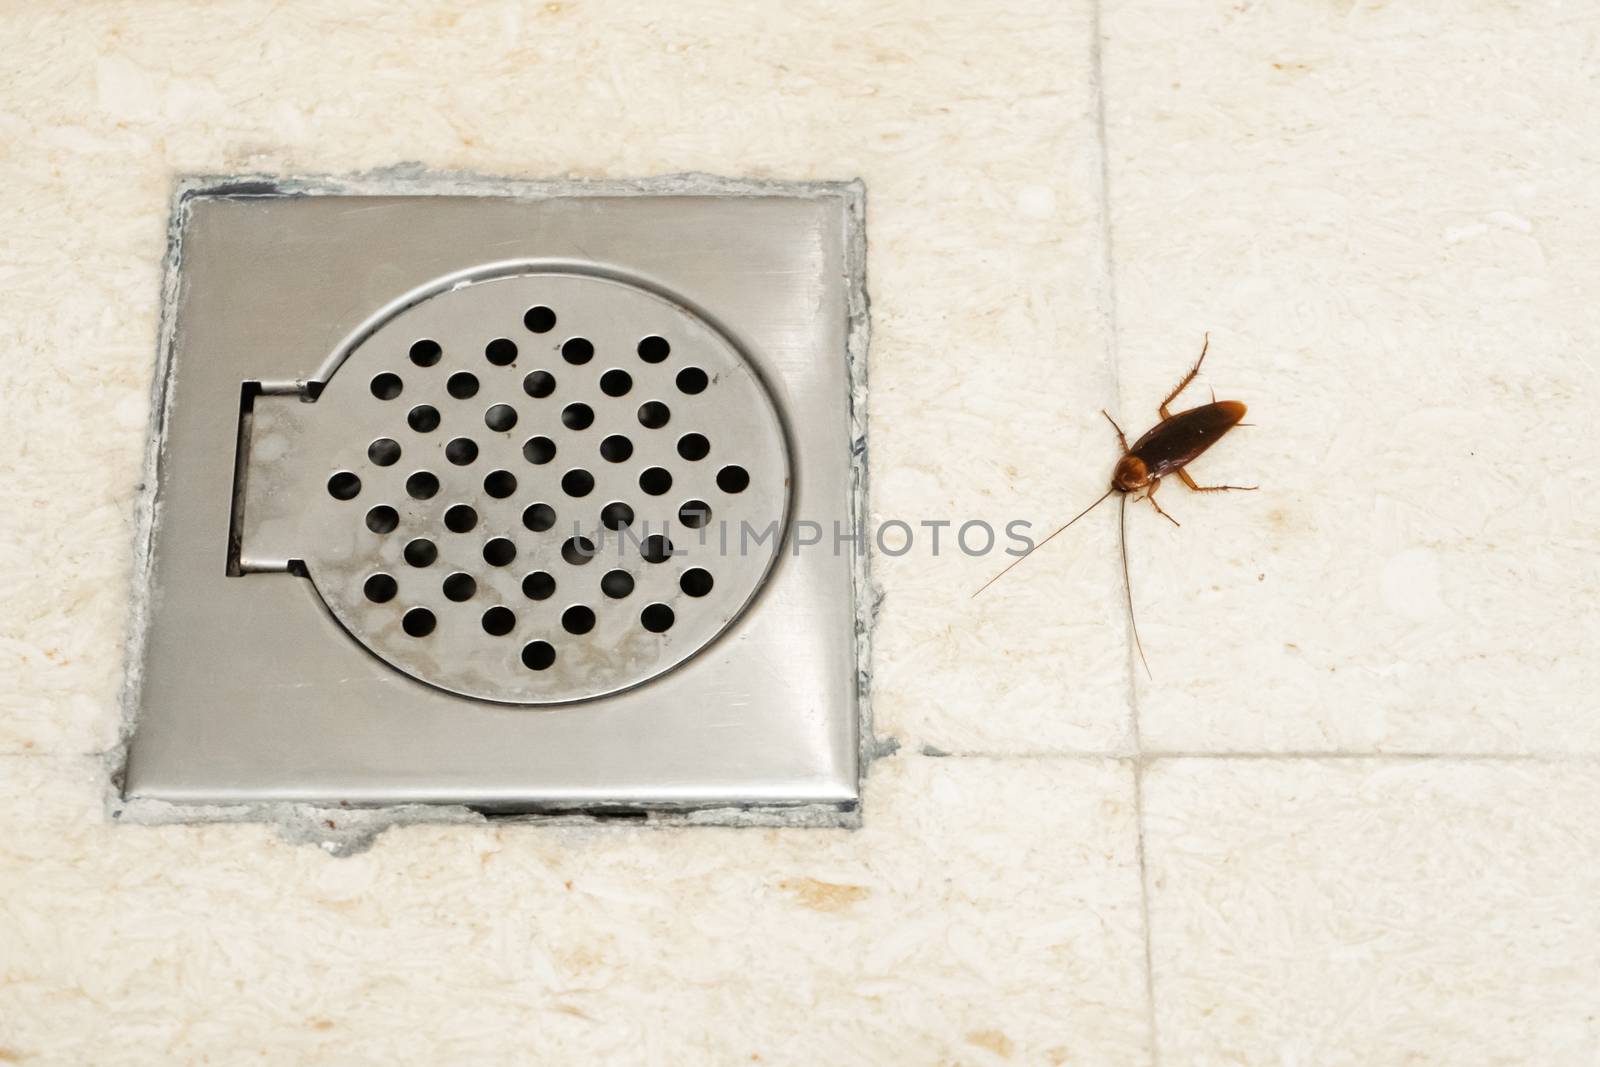 Cockroach in the bathroom near the drain hole. The problem with insects. Cockroaches climb through the sewers. by Try_my_best